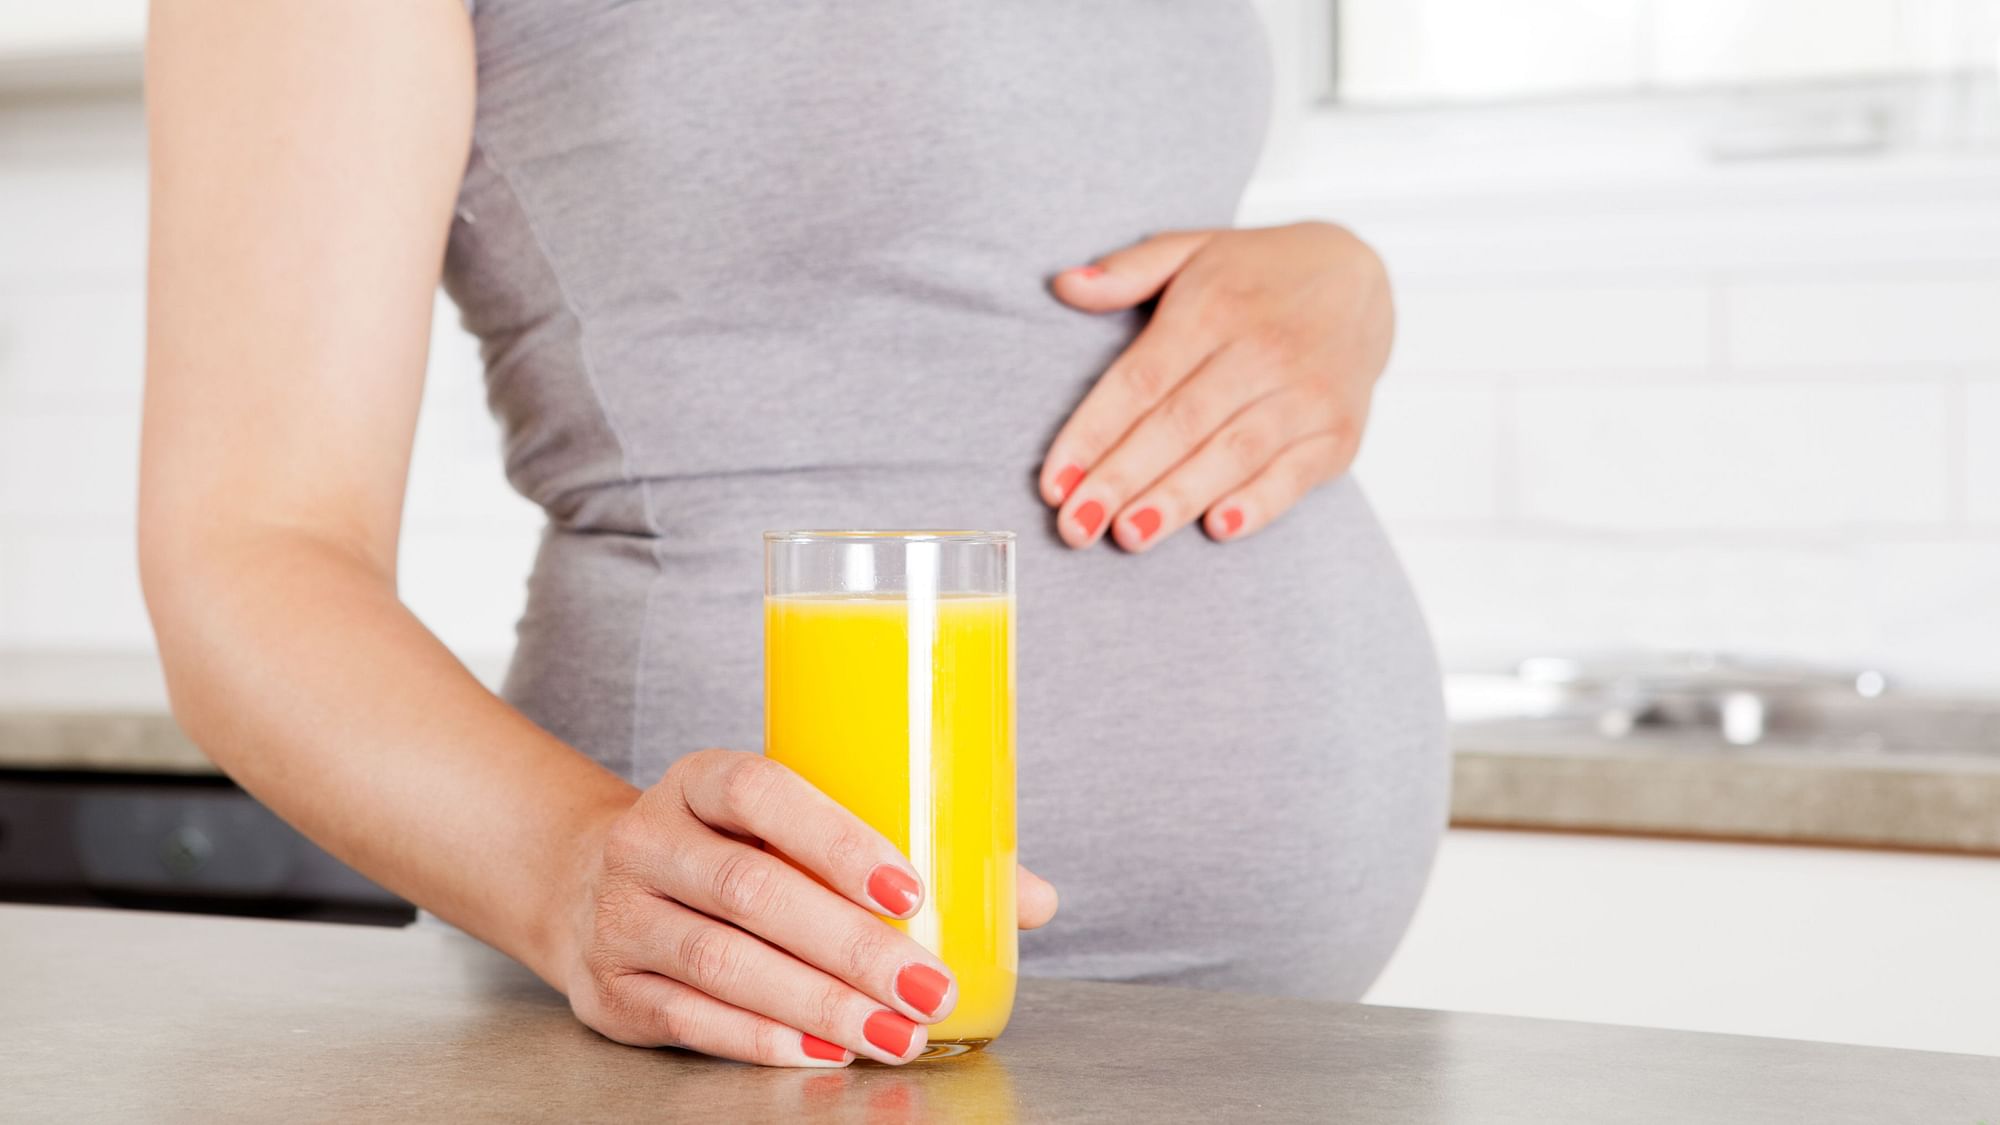 Regular intake of Vitamin C by smoker mom-to-be may help reduce harm done to infant’s lungs after birth.